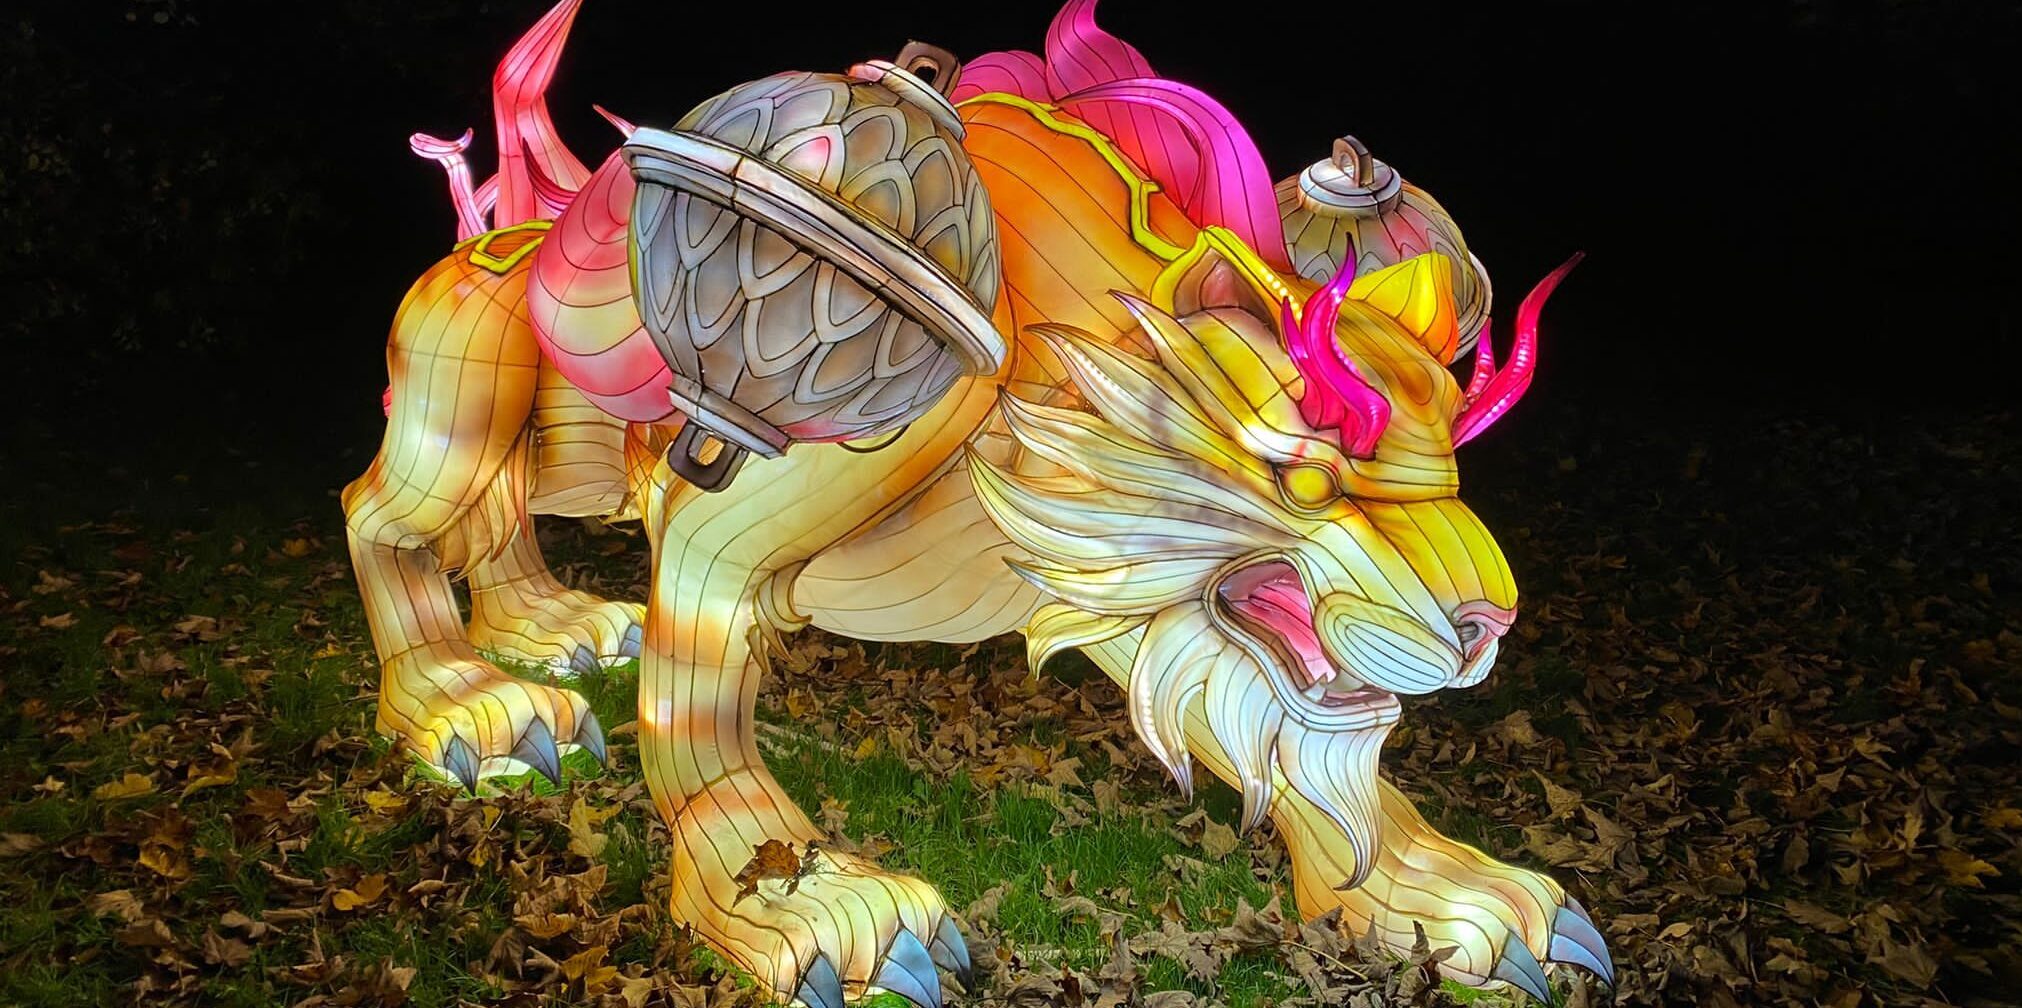 A colourful Lion ready to pounce was one of many displays at Lightopia